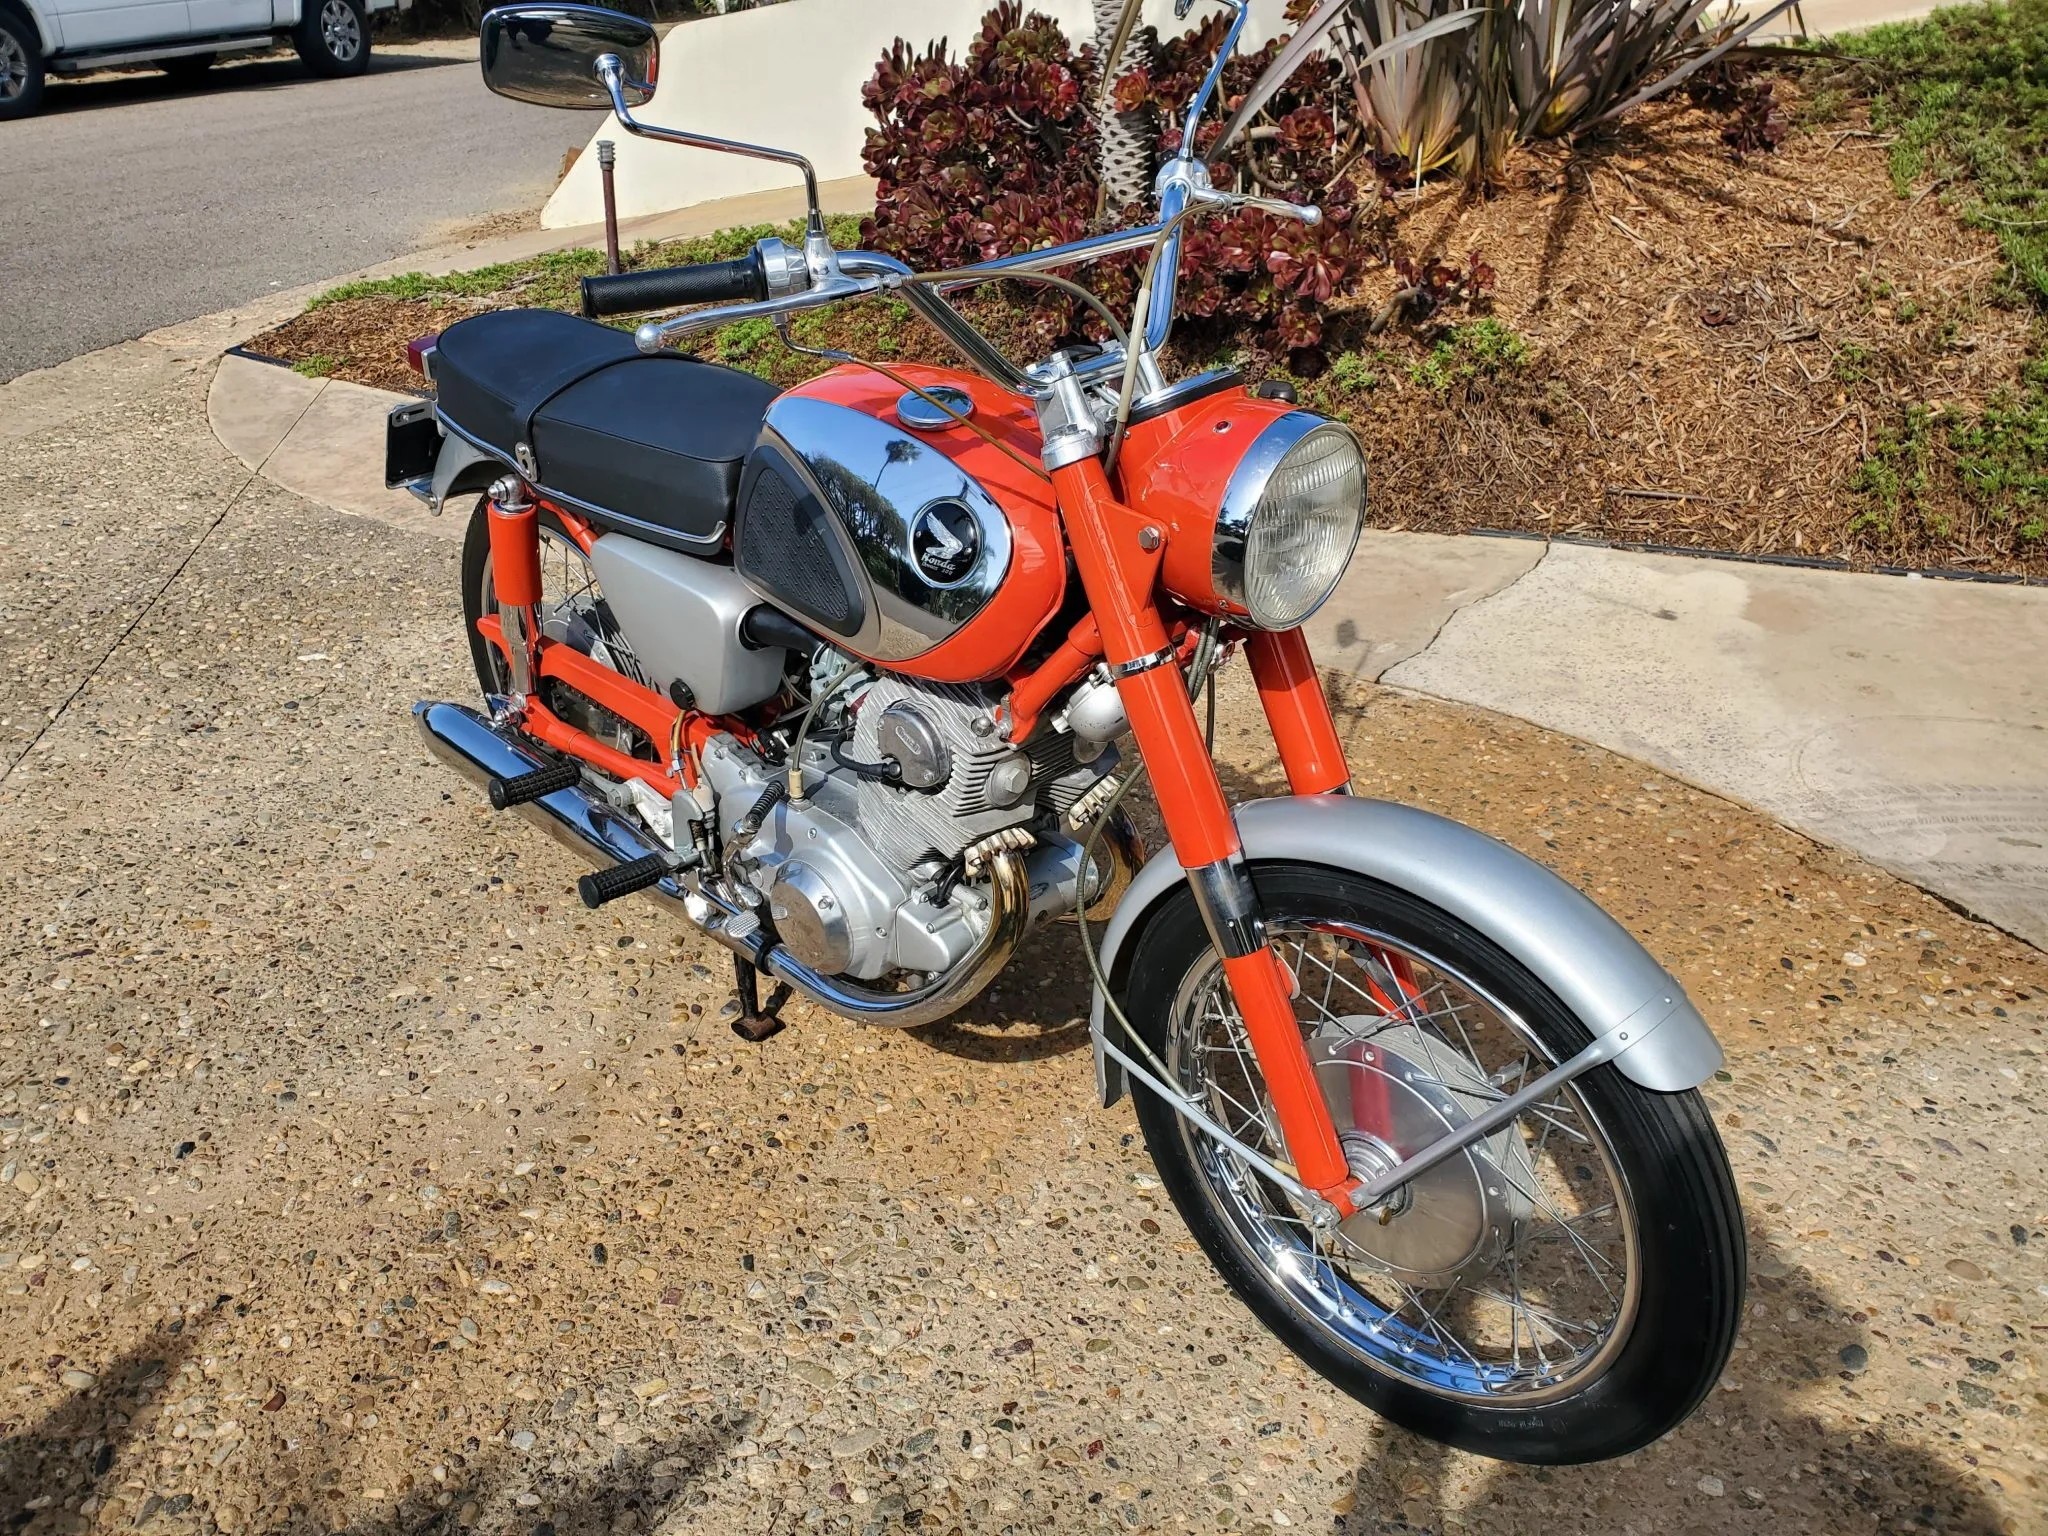 Collectible 1979 Honda CBX in Near-Perfect Shape Will Set You Back Nearly  $30K - autoevolution